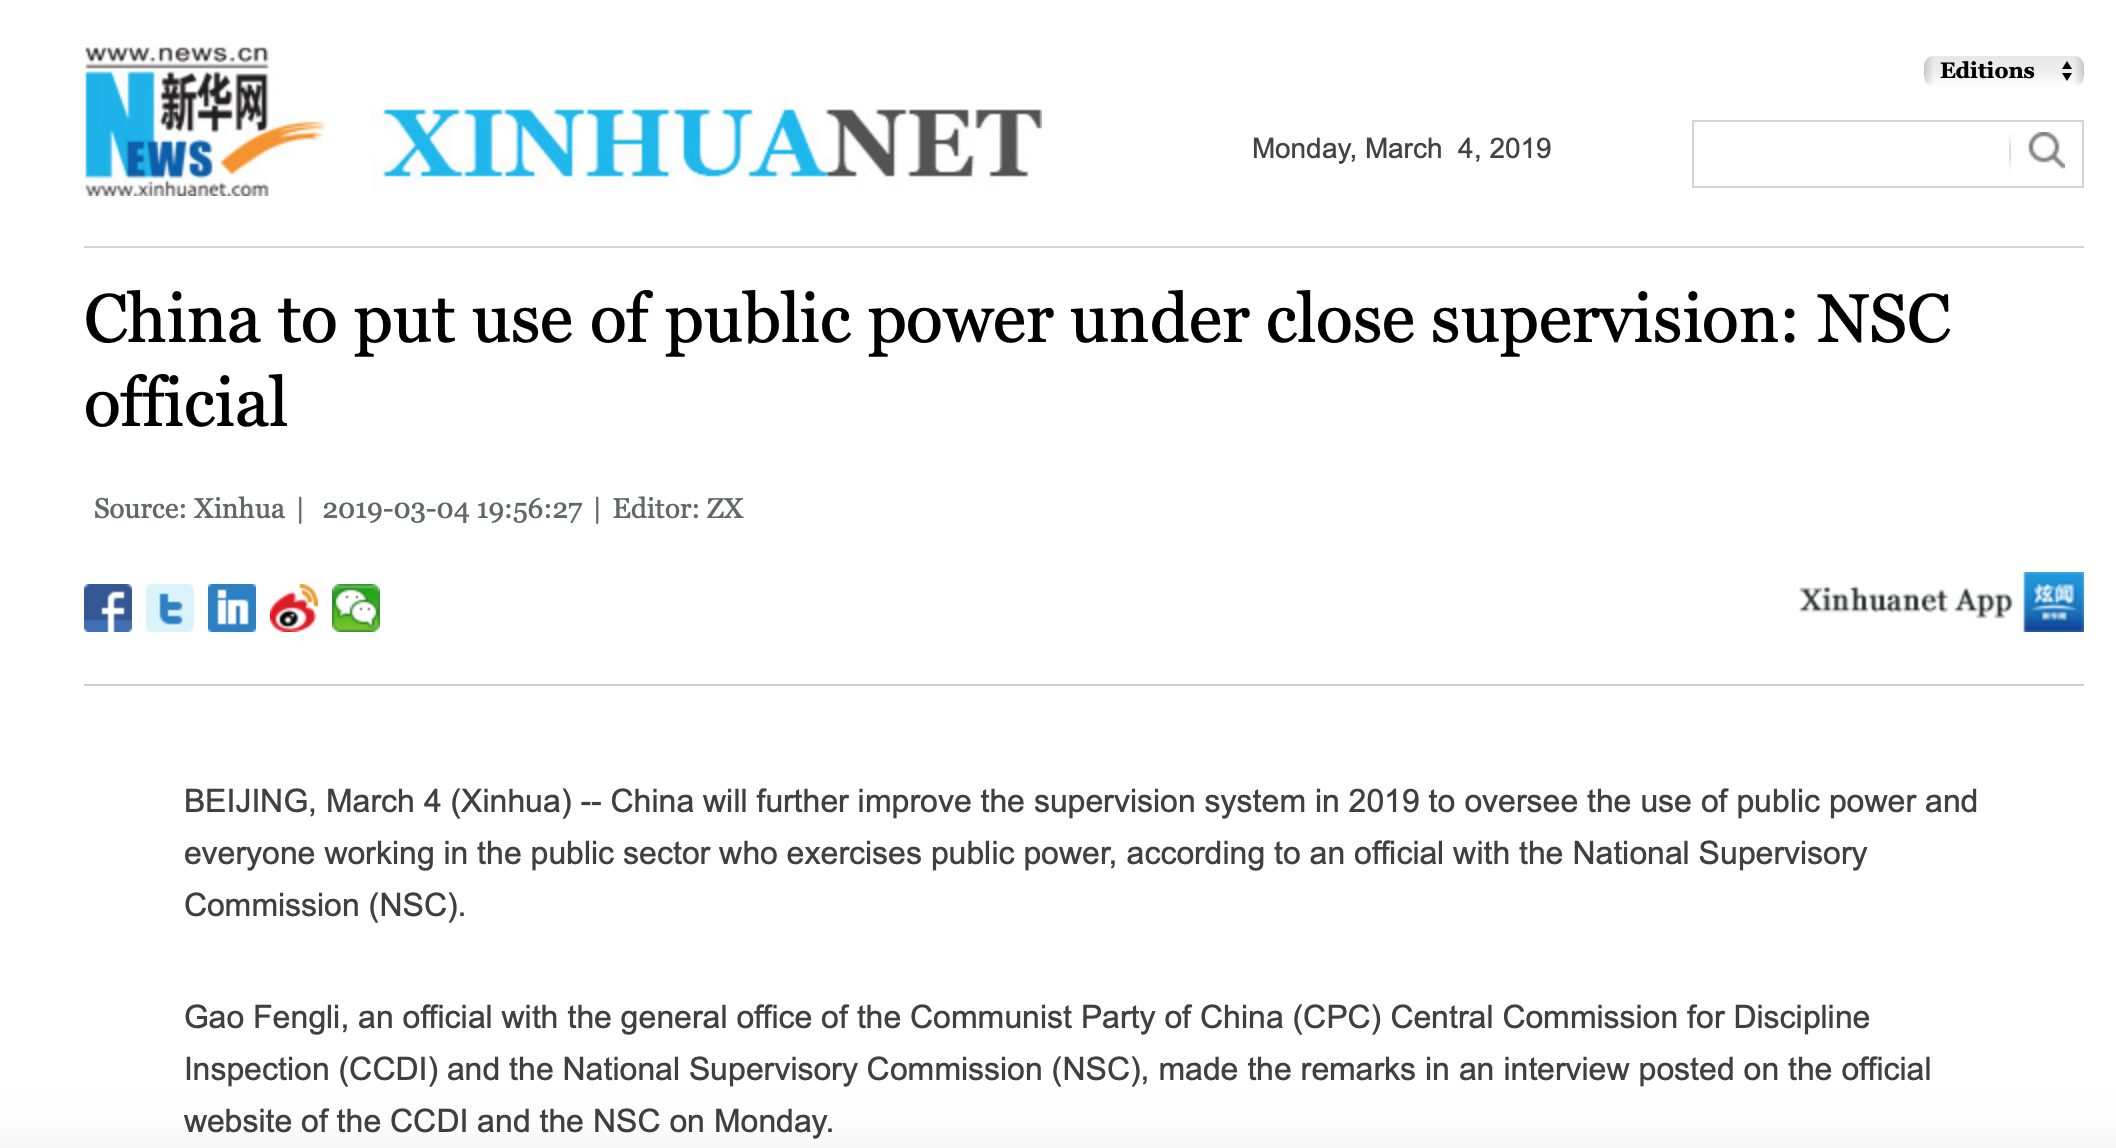 Chinese officials claim that public power will be put under tighter supervision 